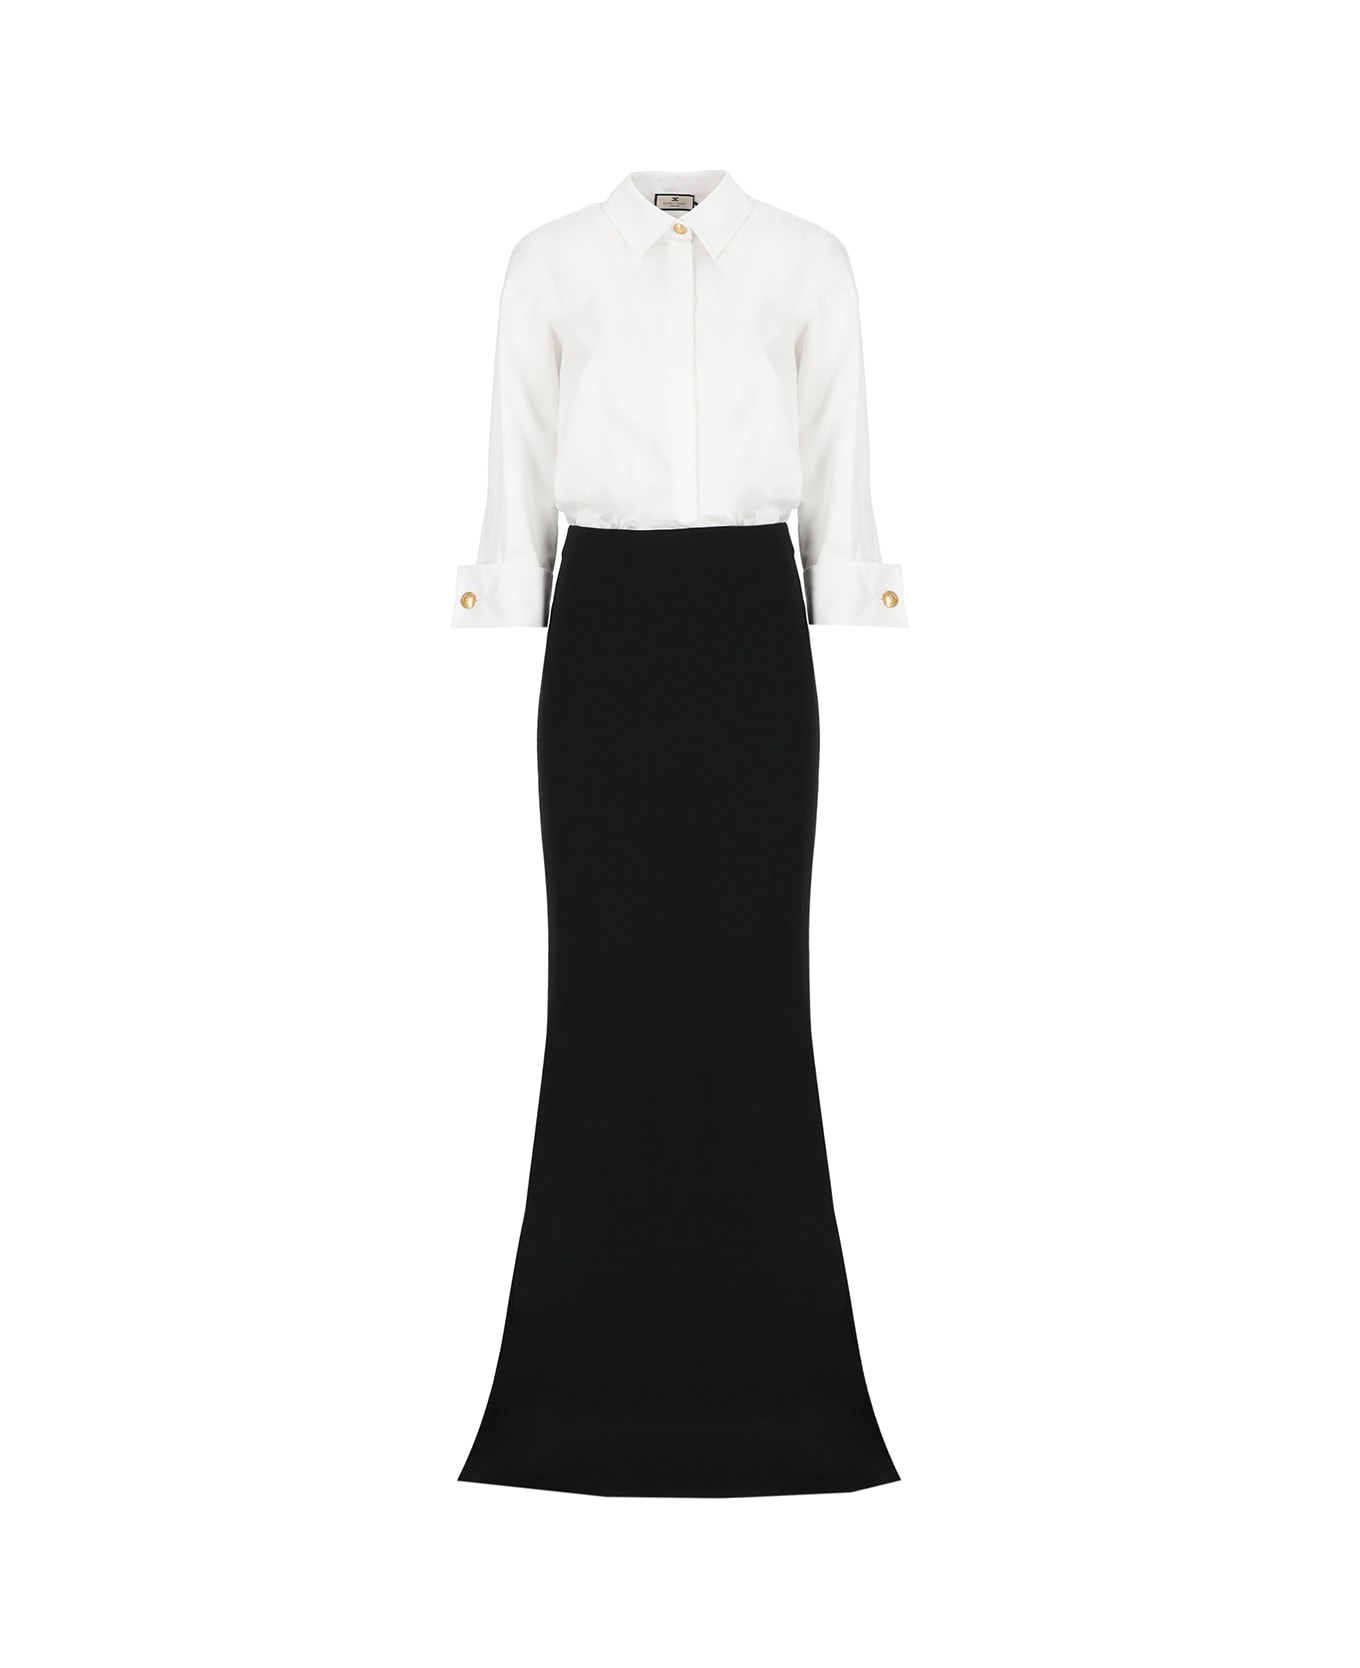 Elisabetta Franchi Combined Red Carpet Dress In Cotton And Crepe - White/black スカート